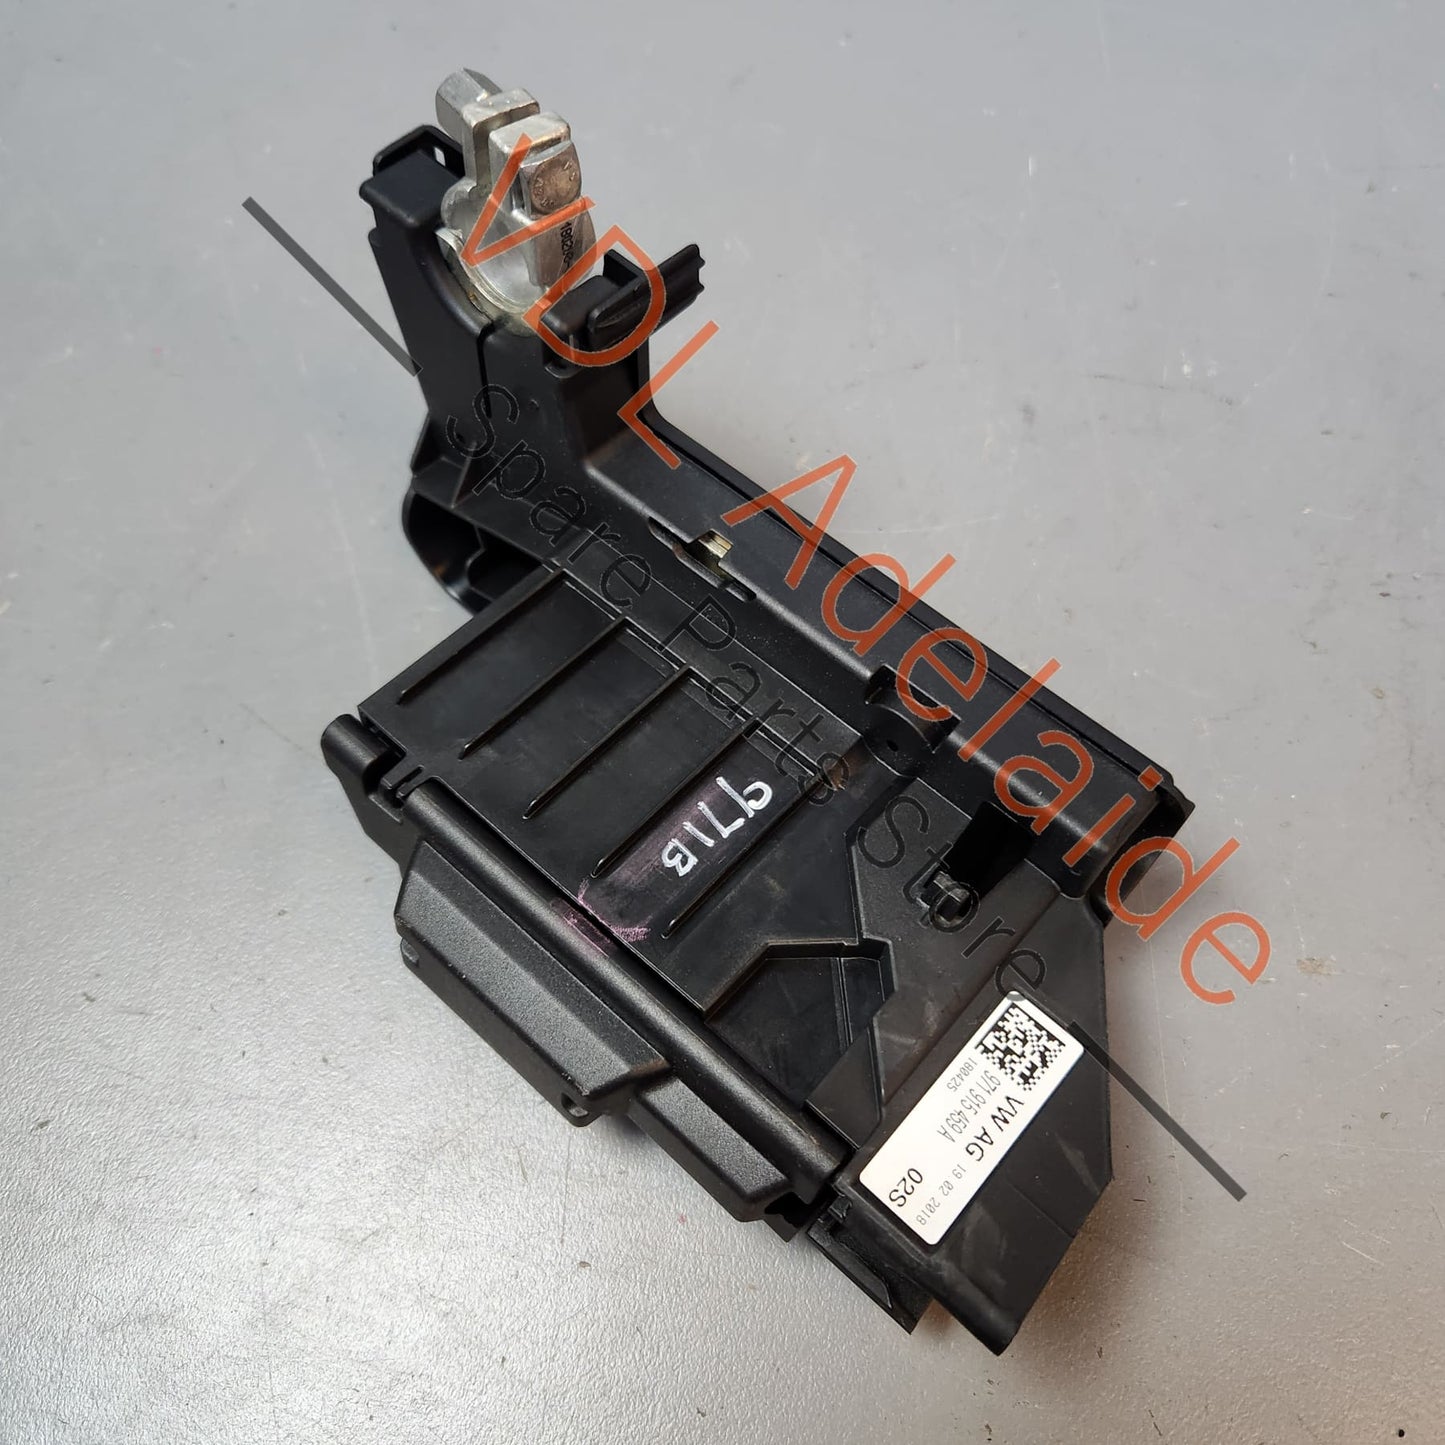 Porsche Panamera 971 Rear Fuse Board for Central Protection Pyrotechnic Battery Isolation 971915459A 971915459A      